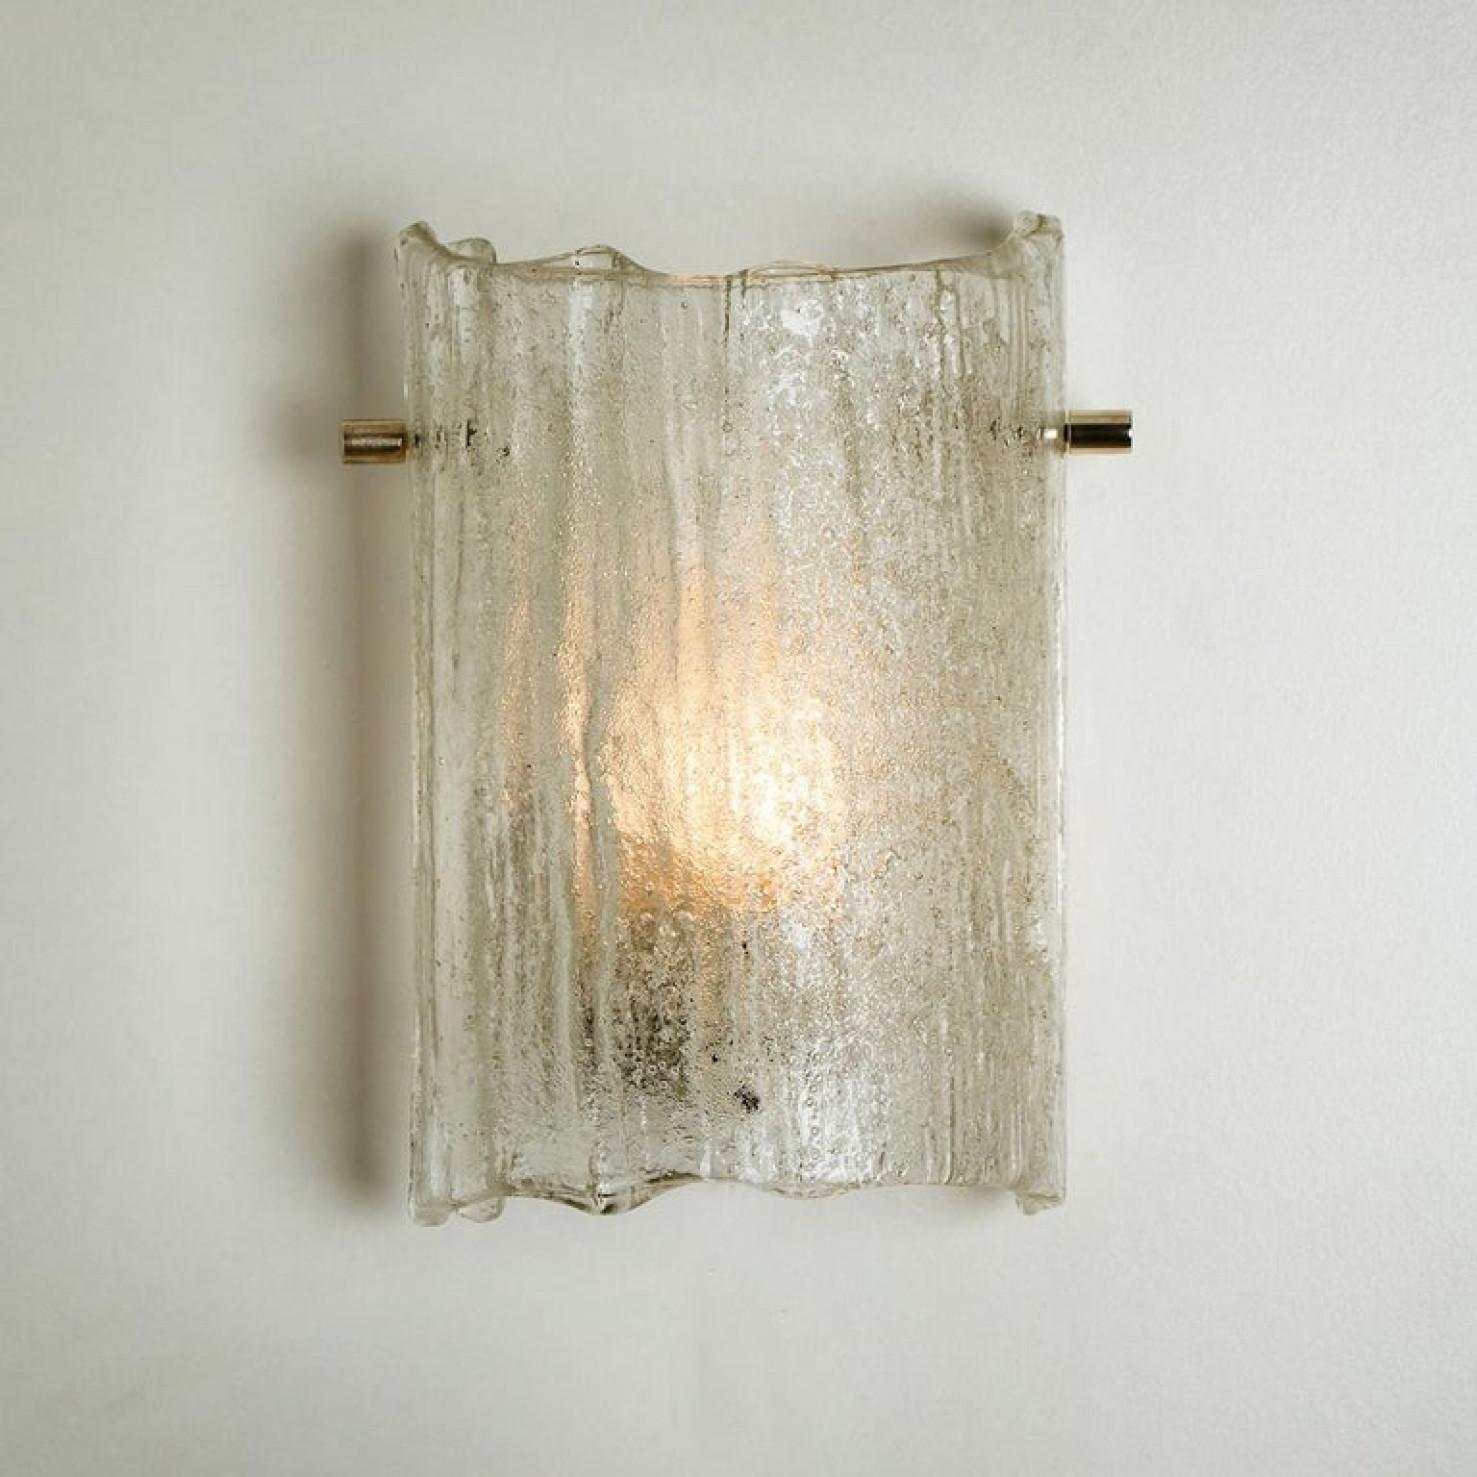 Metal 1 of the 5 pairs Massive Glass Wall Light Fixtures by J.T. Kalmar, 1960 For Sale